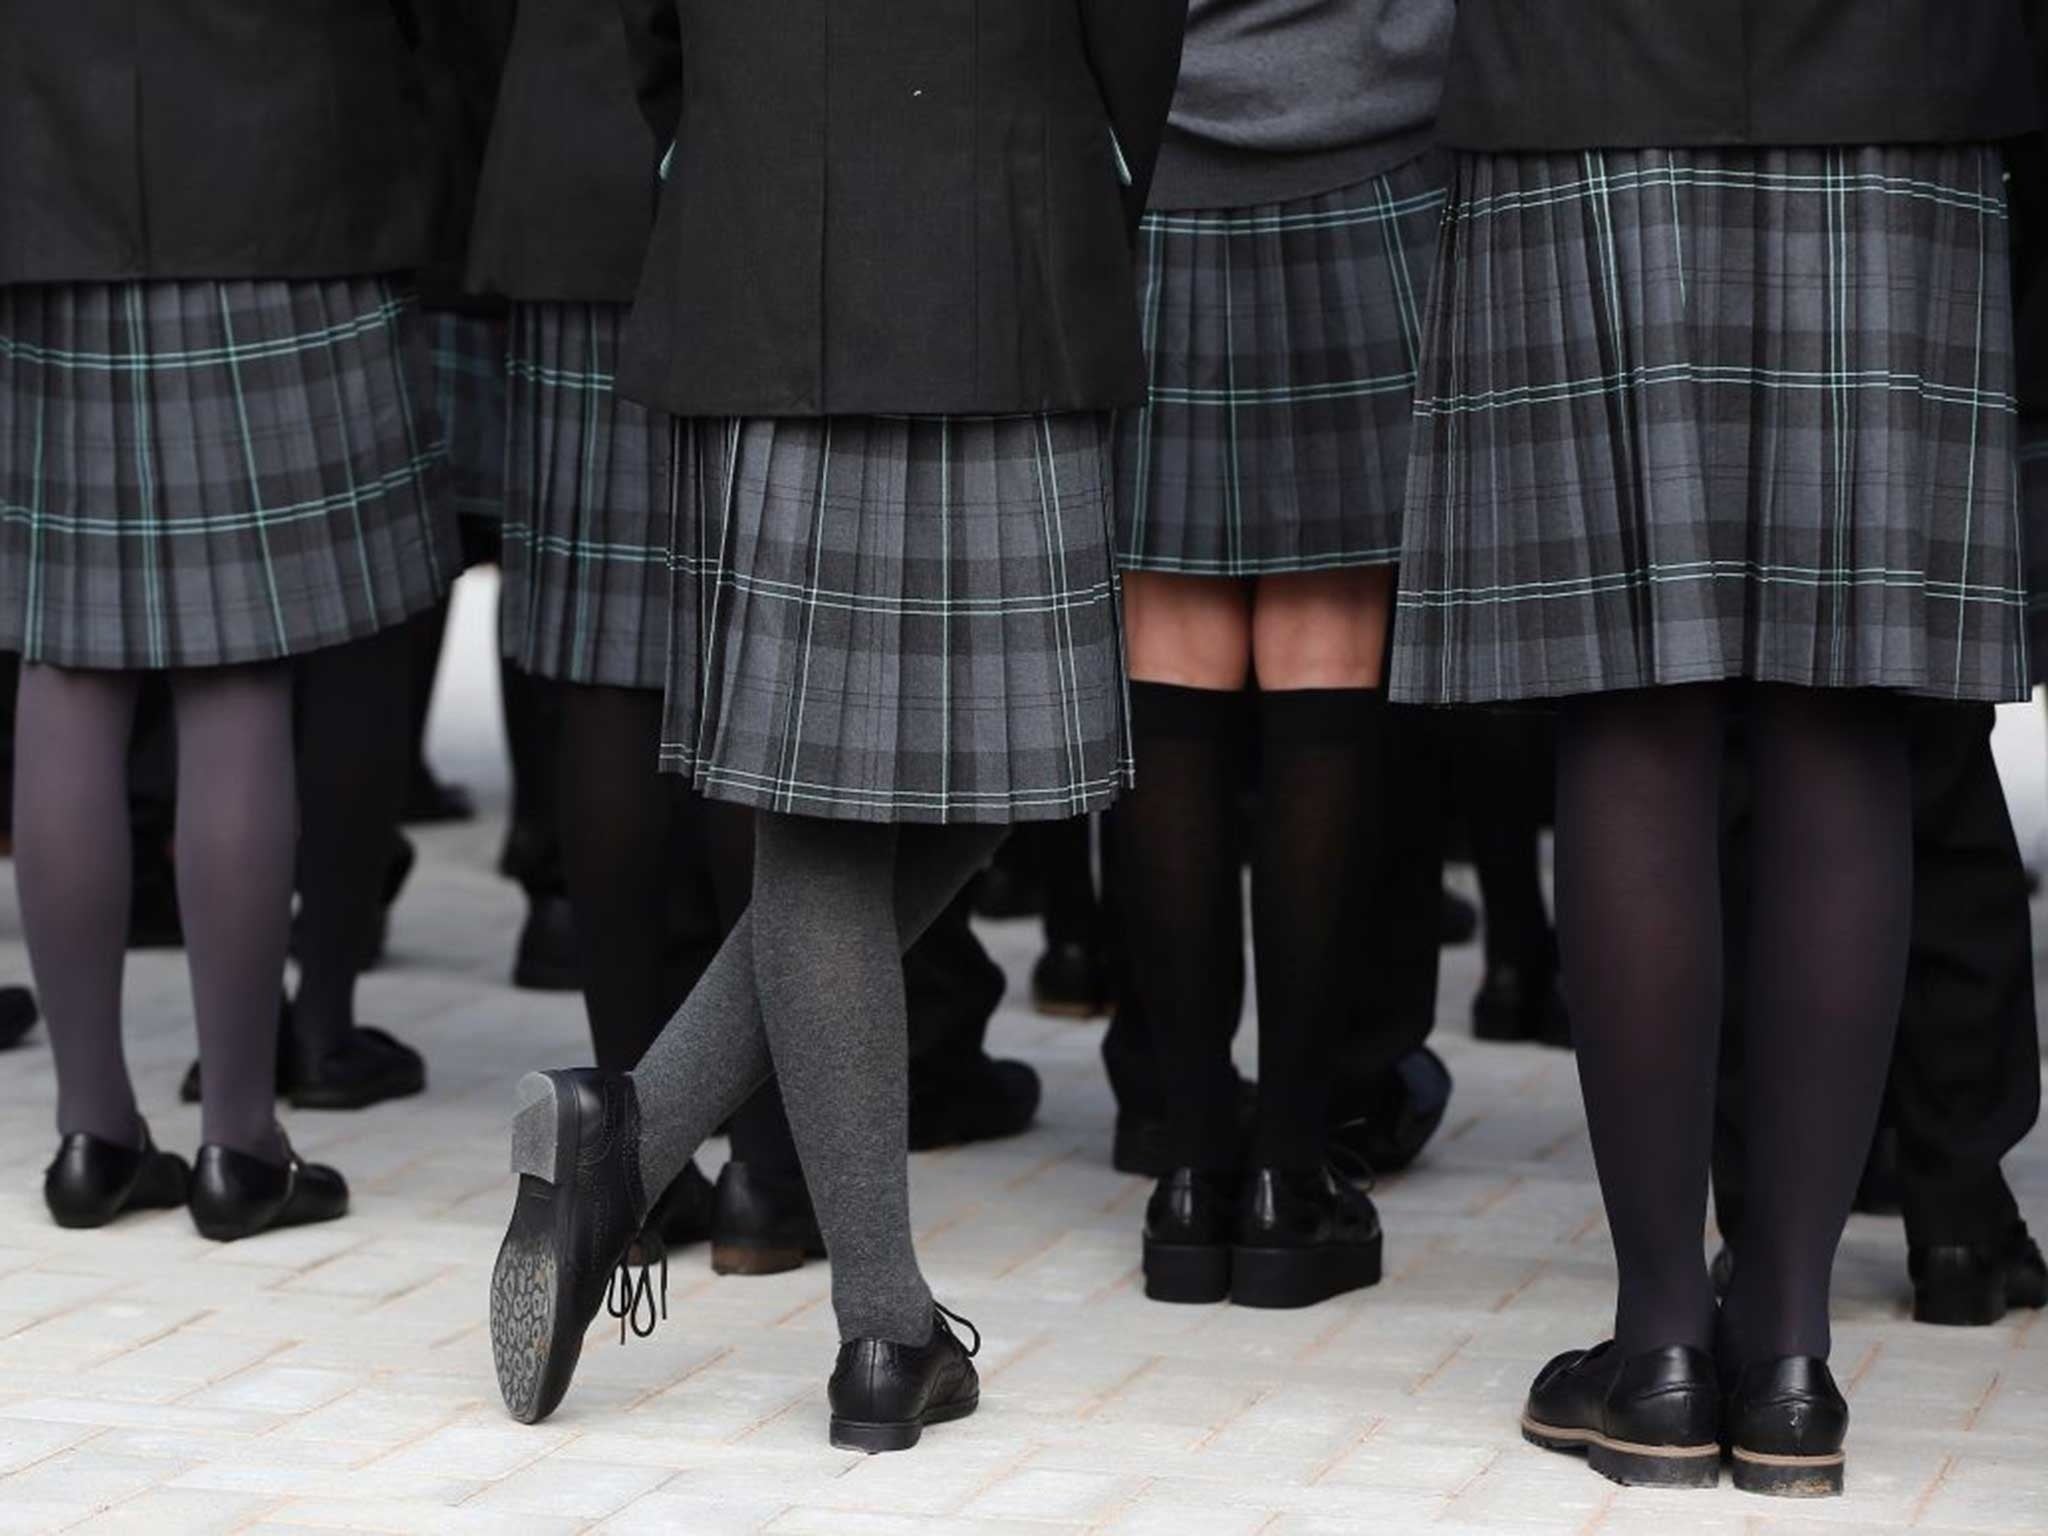 Schoolgirls Porn - Man posing as police officer attempts to abduct schoolgirls in north London  | The Independent | The Independent